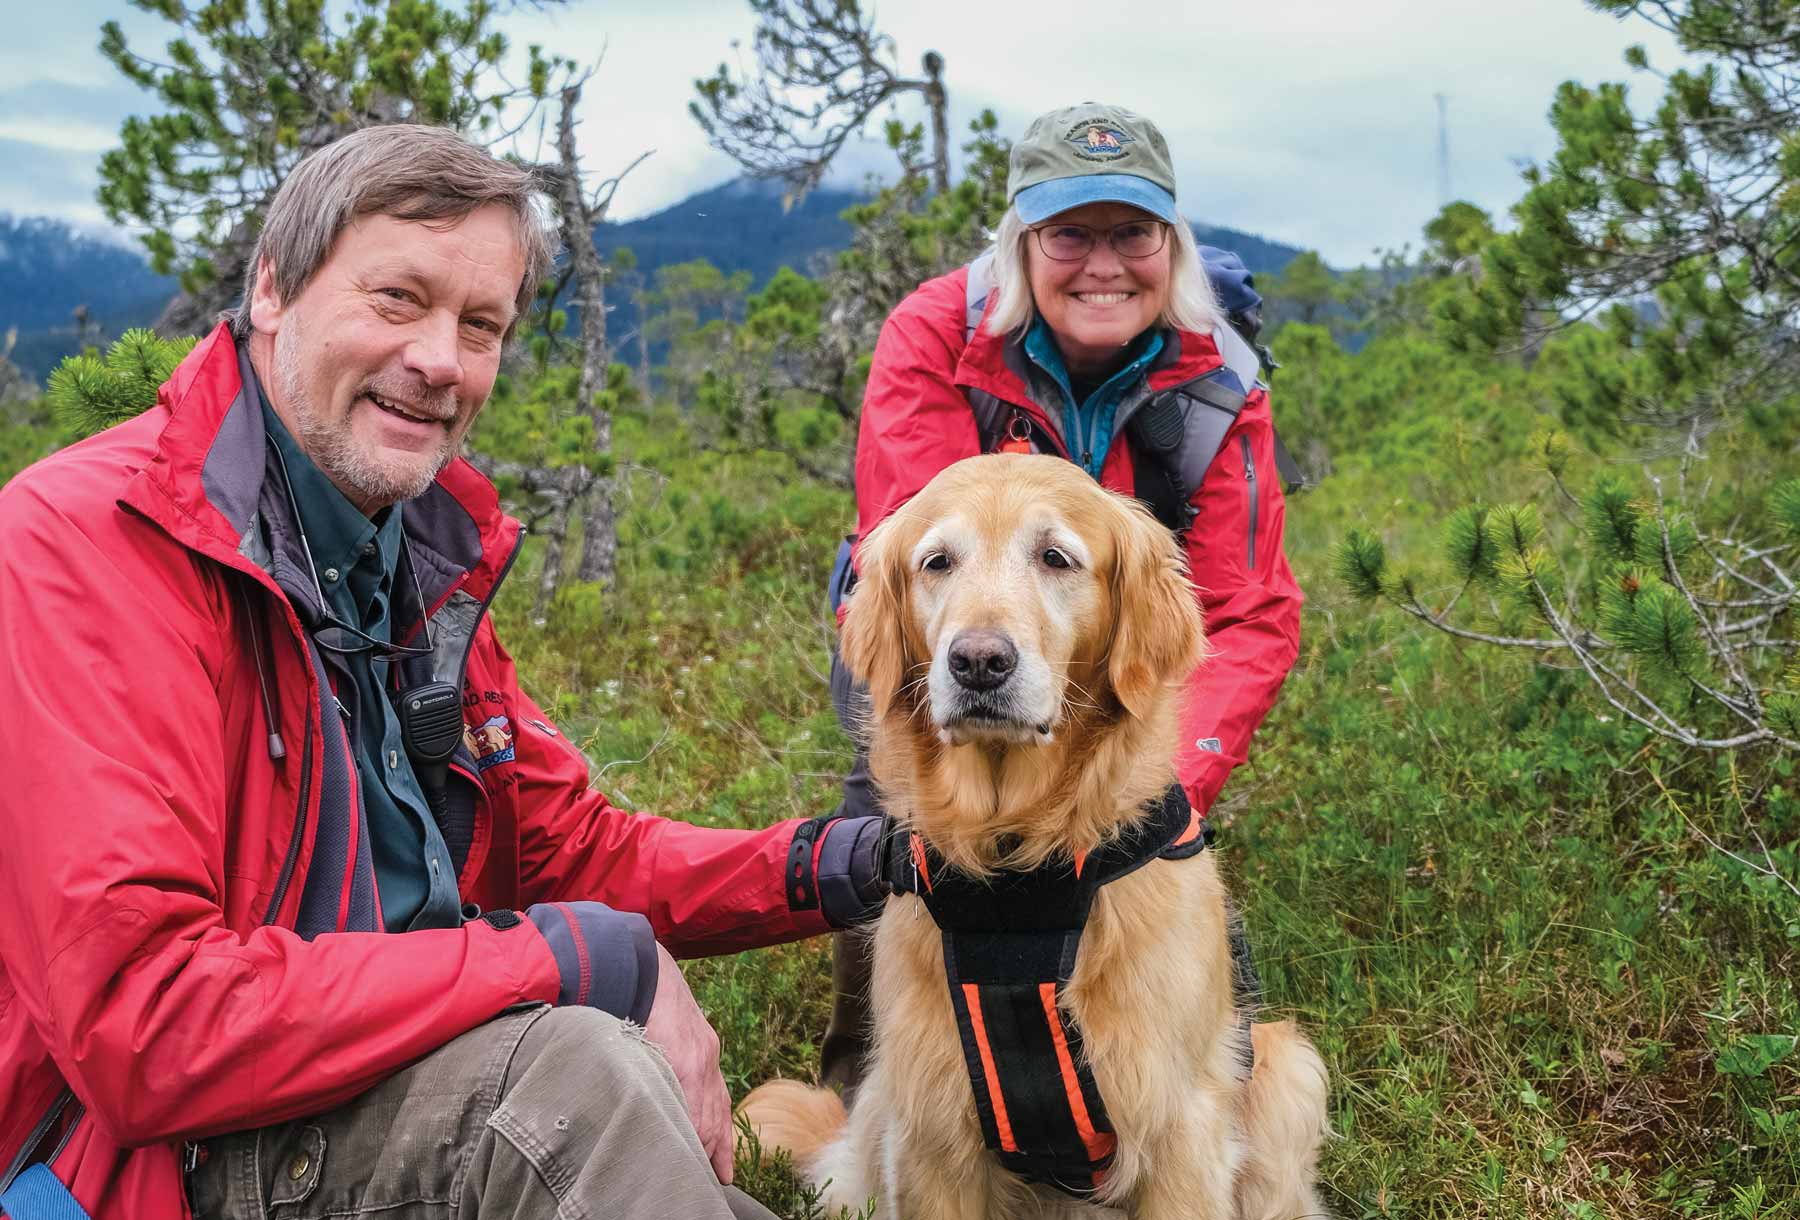 Geoff and Marcy Larson with their dog Tango in a grassy opening